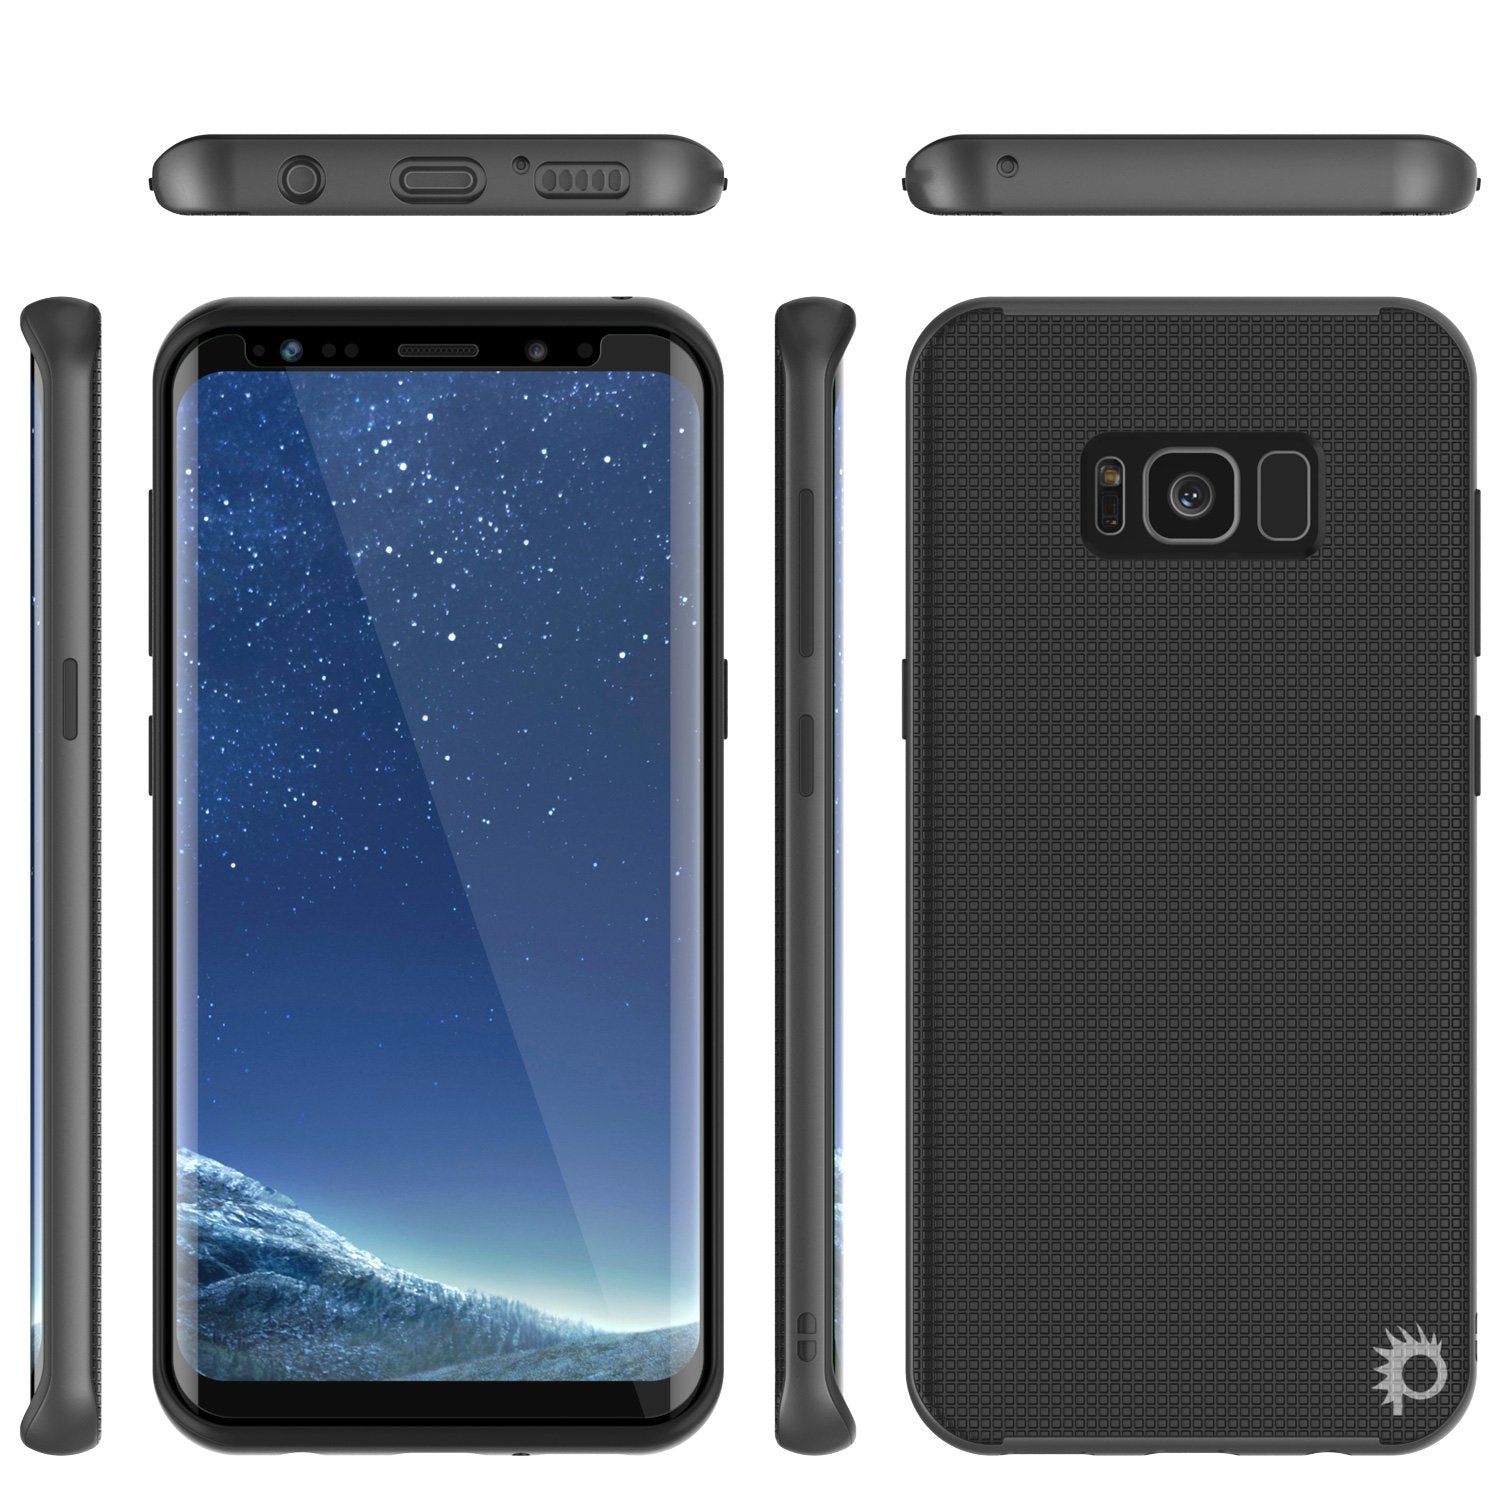 Galaxy S8 Case, PunkCase Stealth Grey Series Hybrid 3-Piece Shockproof Dual Layer Cover